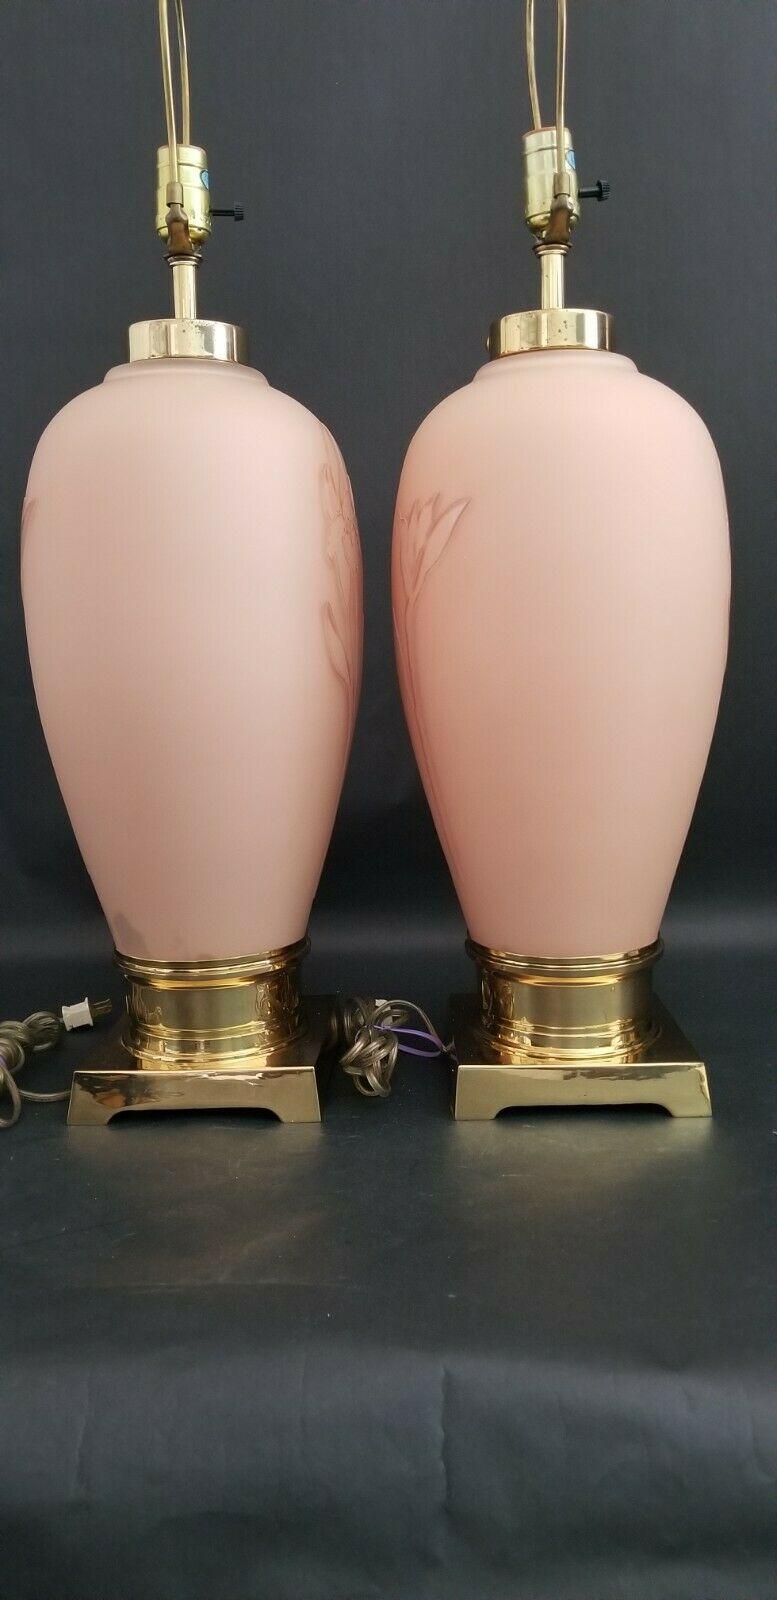 Brass Art Deco Floral Relief Table Lamps - A Pair by Vianne Glass of France For Sale